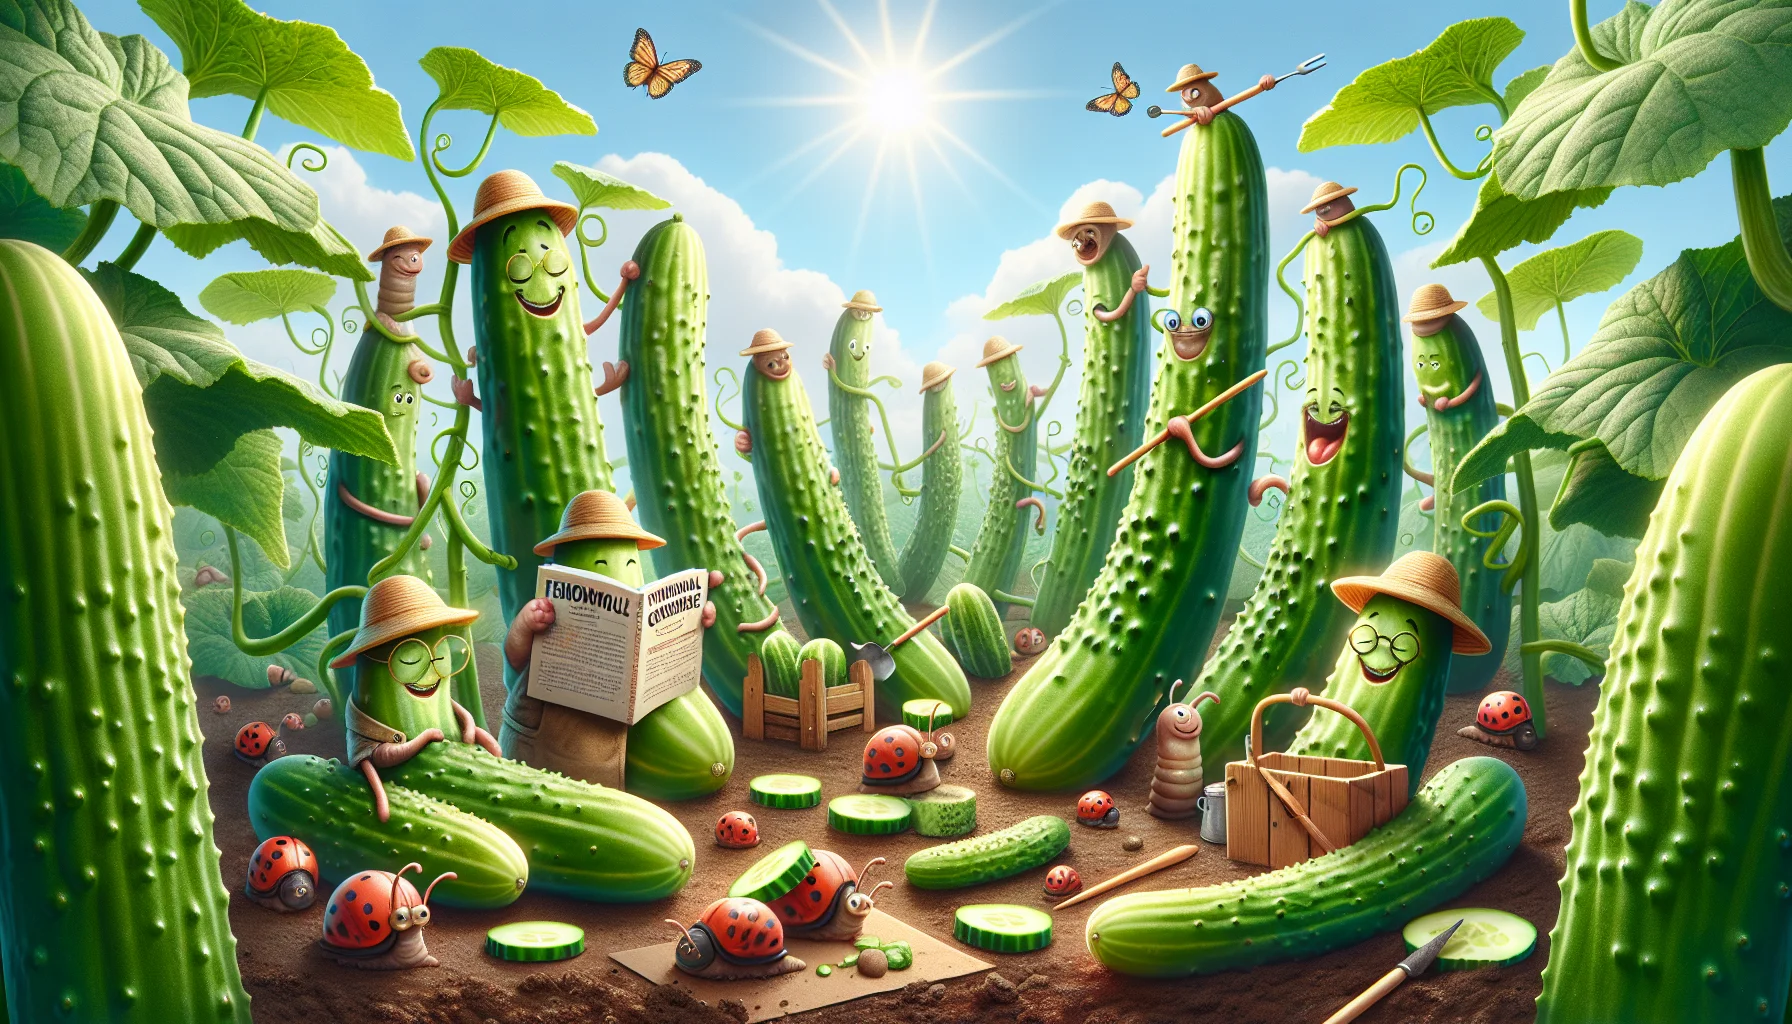 Create a whimsical scene of cucumber season highlighting the joy of gardening. Picture this scenario as a miniature world, where earthworms are wearing teeny gardener hats and using toothpick tools to tenderly care for lush, towering cucumber plants. Several plump, ripe cucumbers have comic faces and a few have sprouted tiny limbs, playfully climbing their own plants. A family of ladybugs is having a picnic with cucumber slices, while a snail, sporting a pair of glasses, is reading a 'Guide to Phenomenal Cucumber Care'. Showcase all these fun elements under a bright sunny sky, emphasizing a warm, inviting atmosphere to encourage people to enjoy gardening.